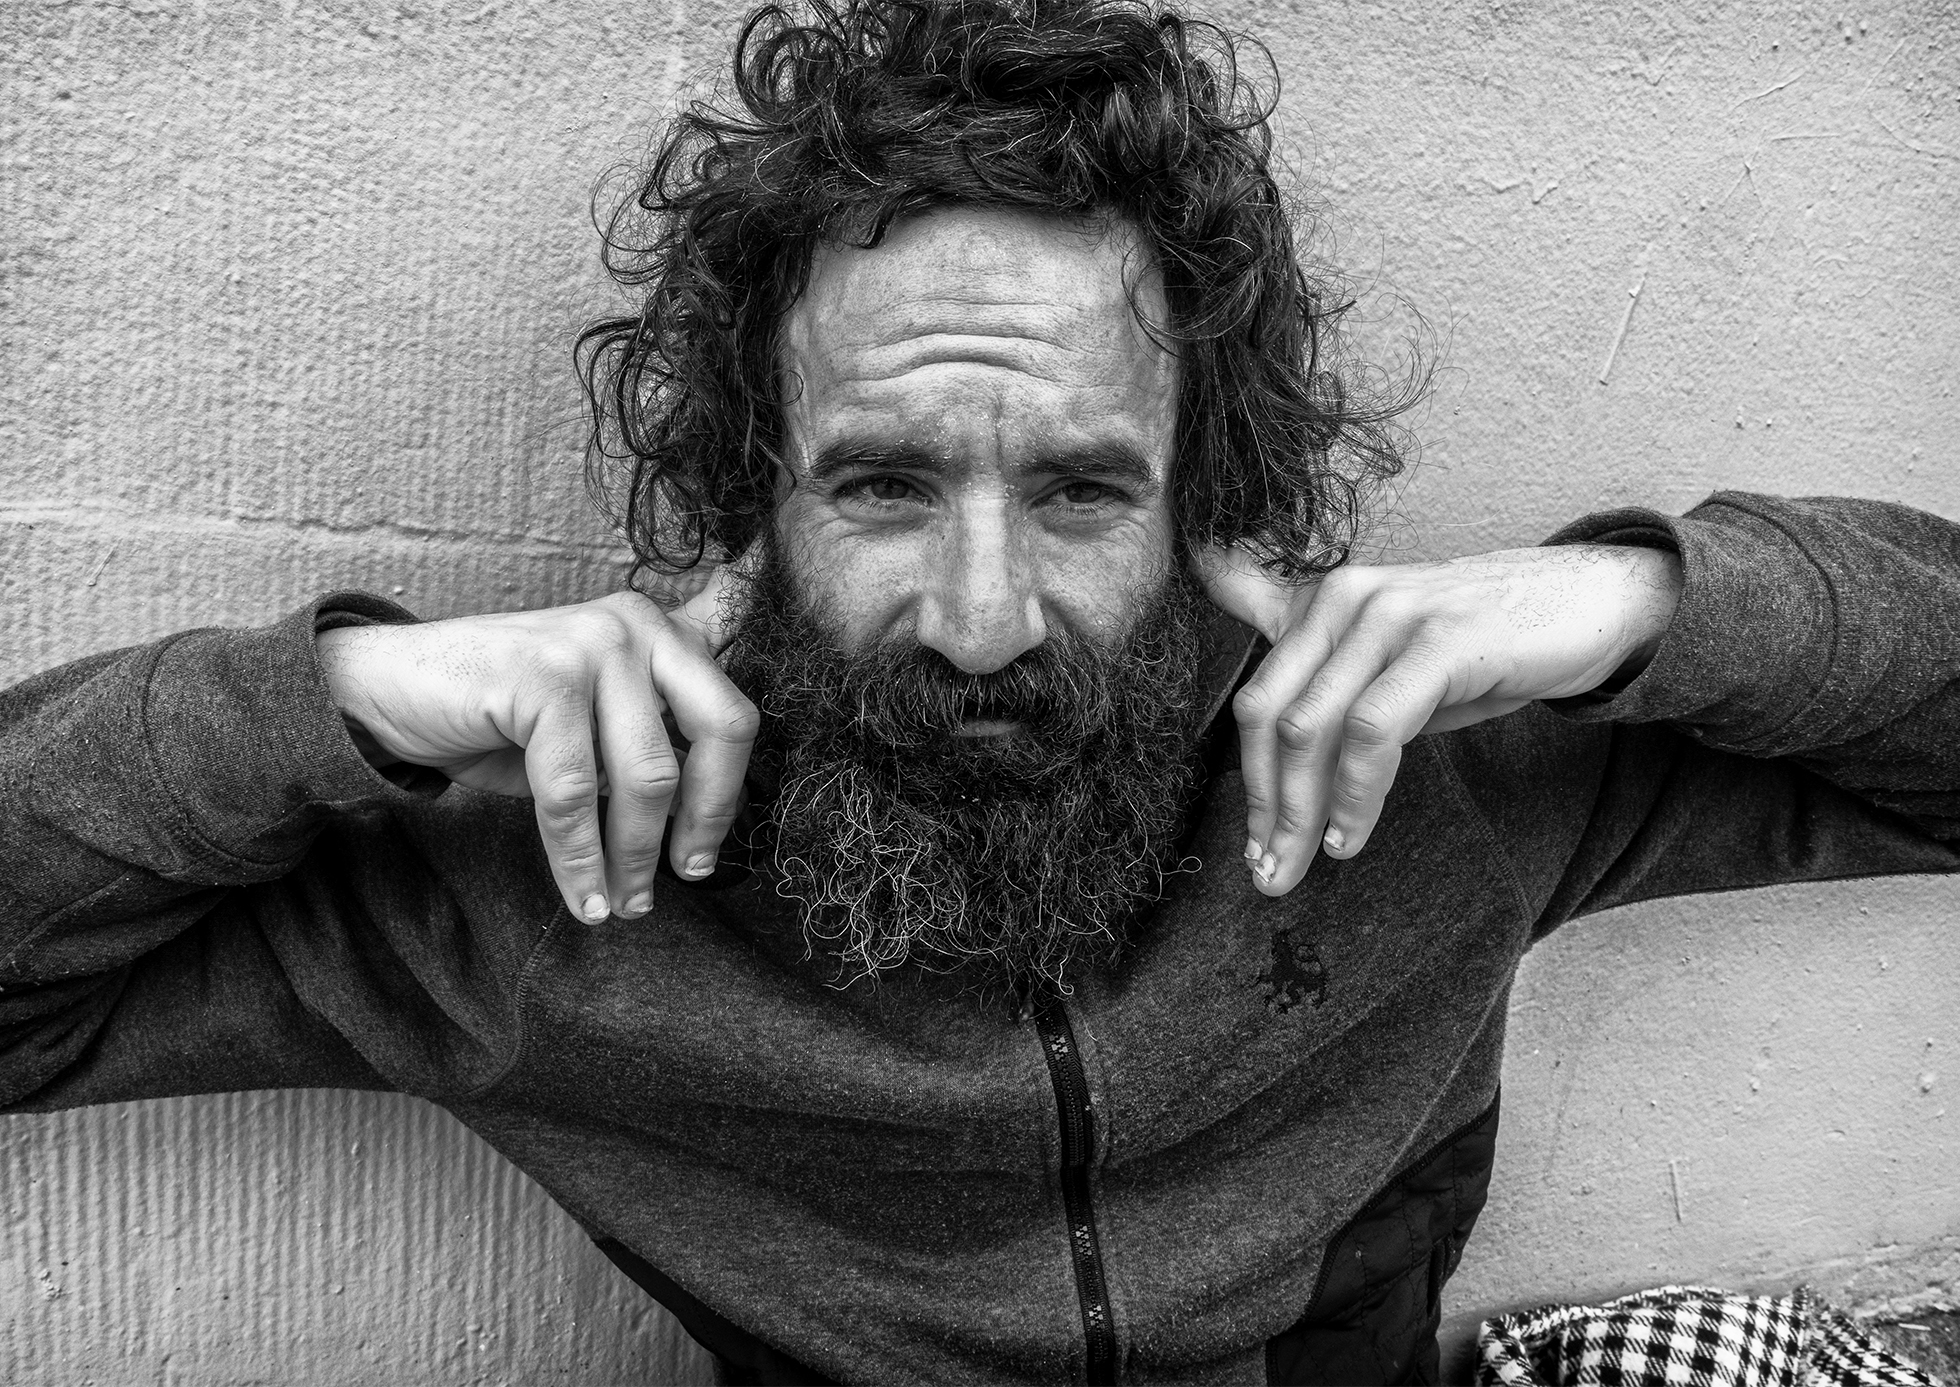 Delson sits on a sidewalk in front of a wall in San Francisco in December 2019. He has wild hair, a mustache, and a beard, and he looks ahead with a finger in each ear. He is wearing a light jacket.